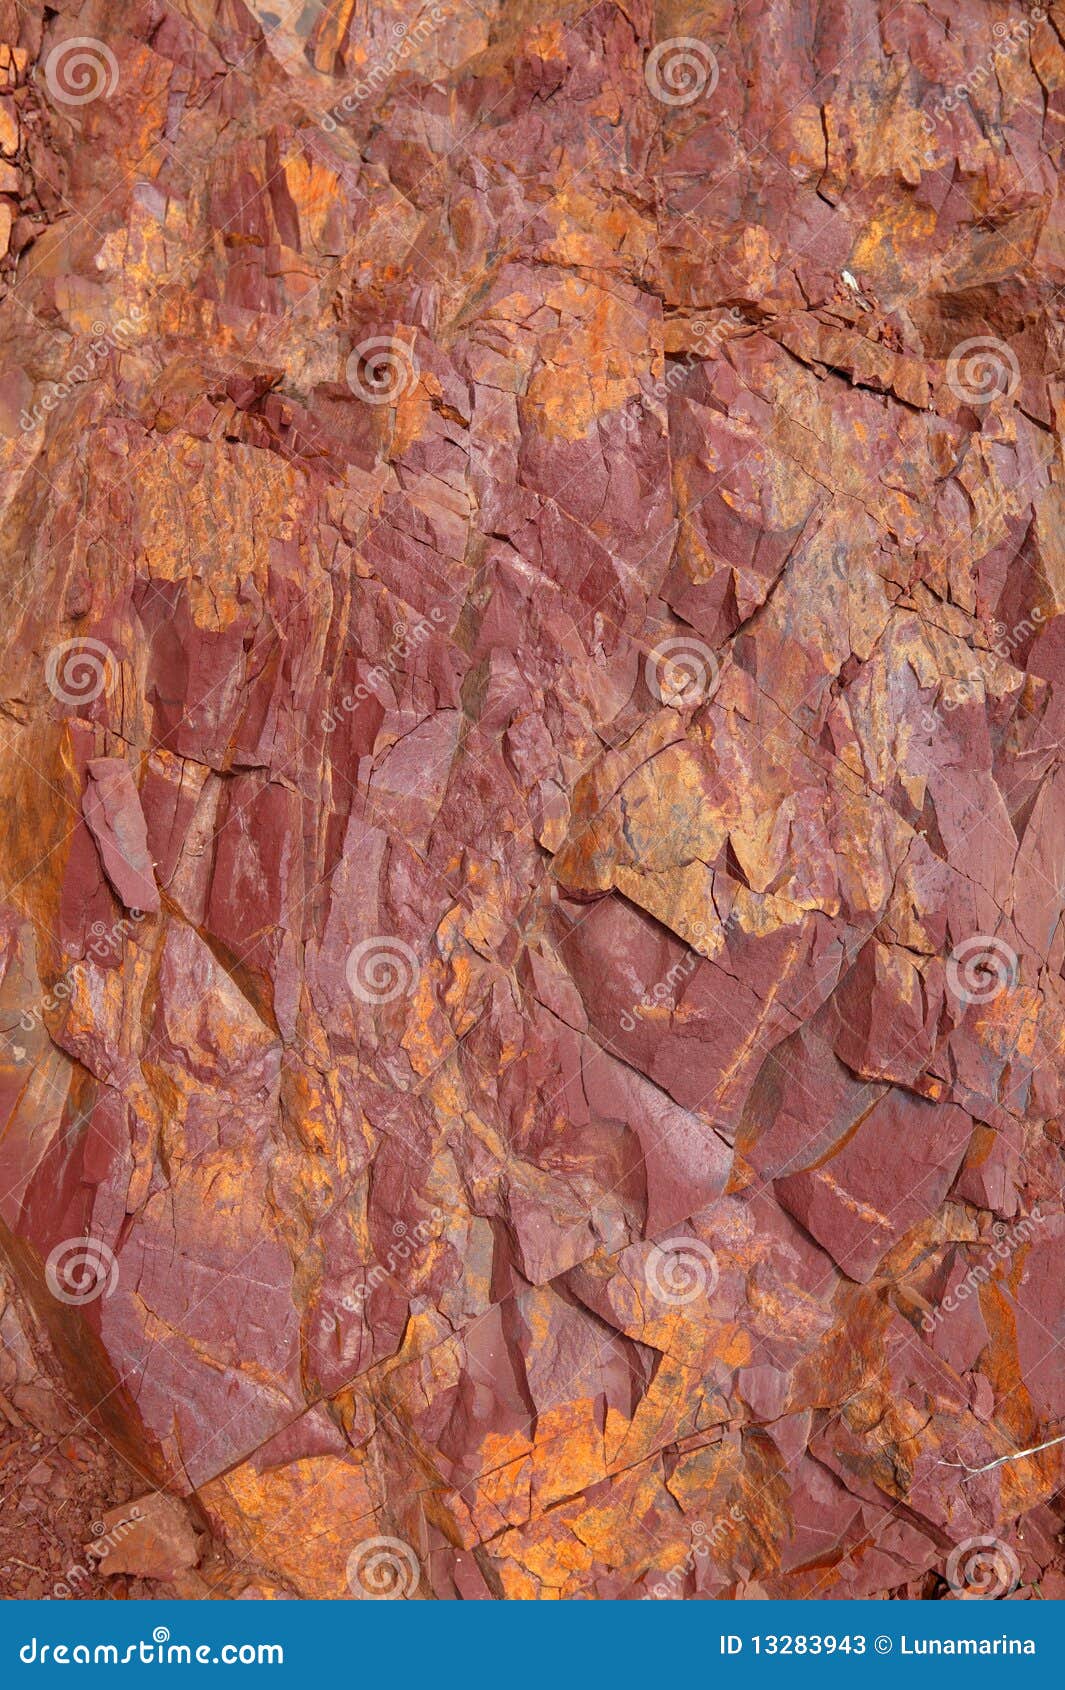 natural mountain with red rodeno stone